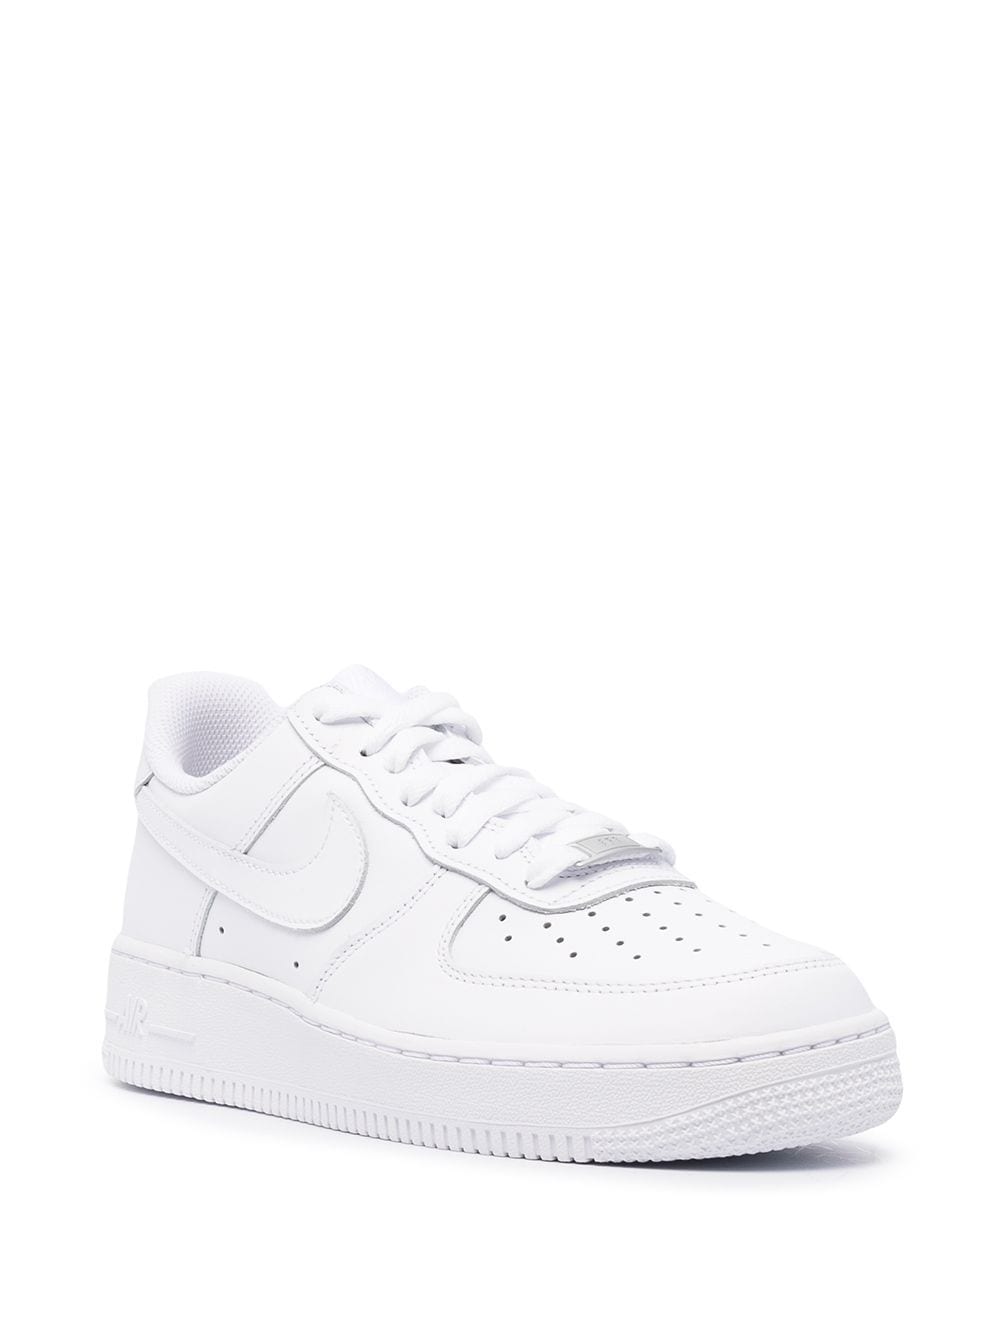 Image 2 of Nike Air Force 1 Low '07 "White On White" sneakers